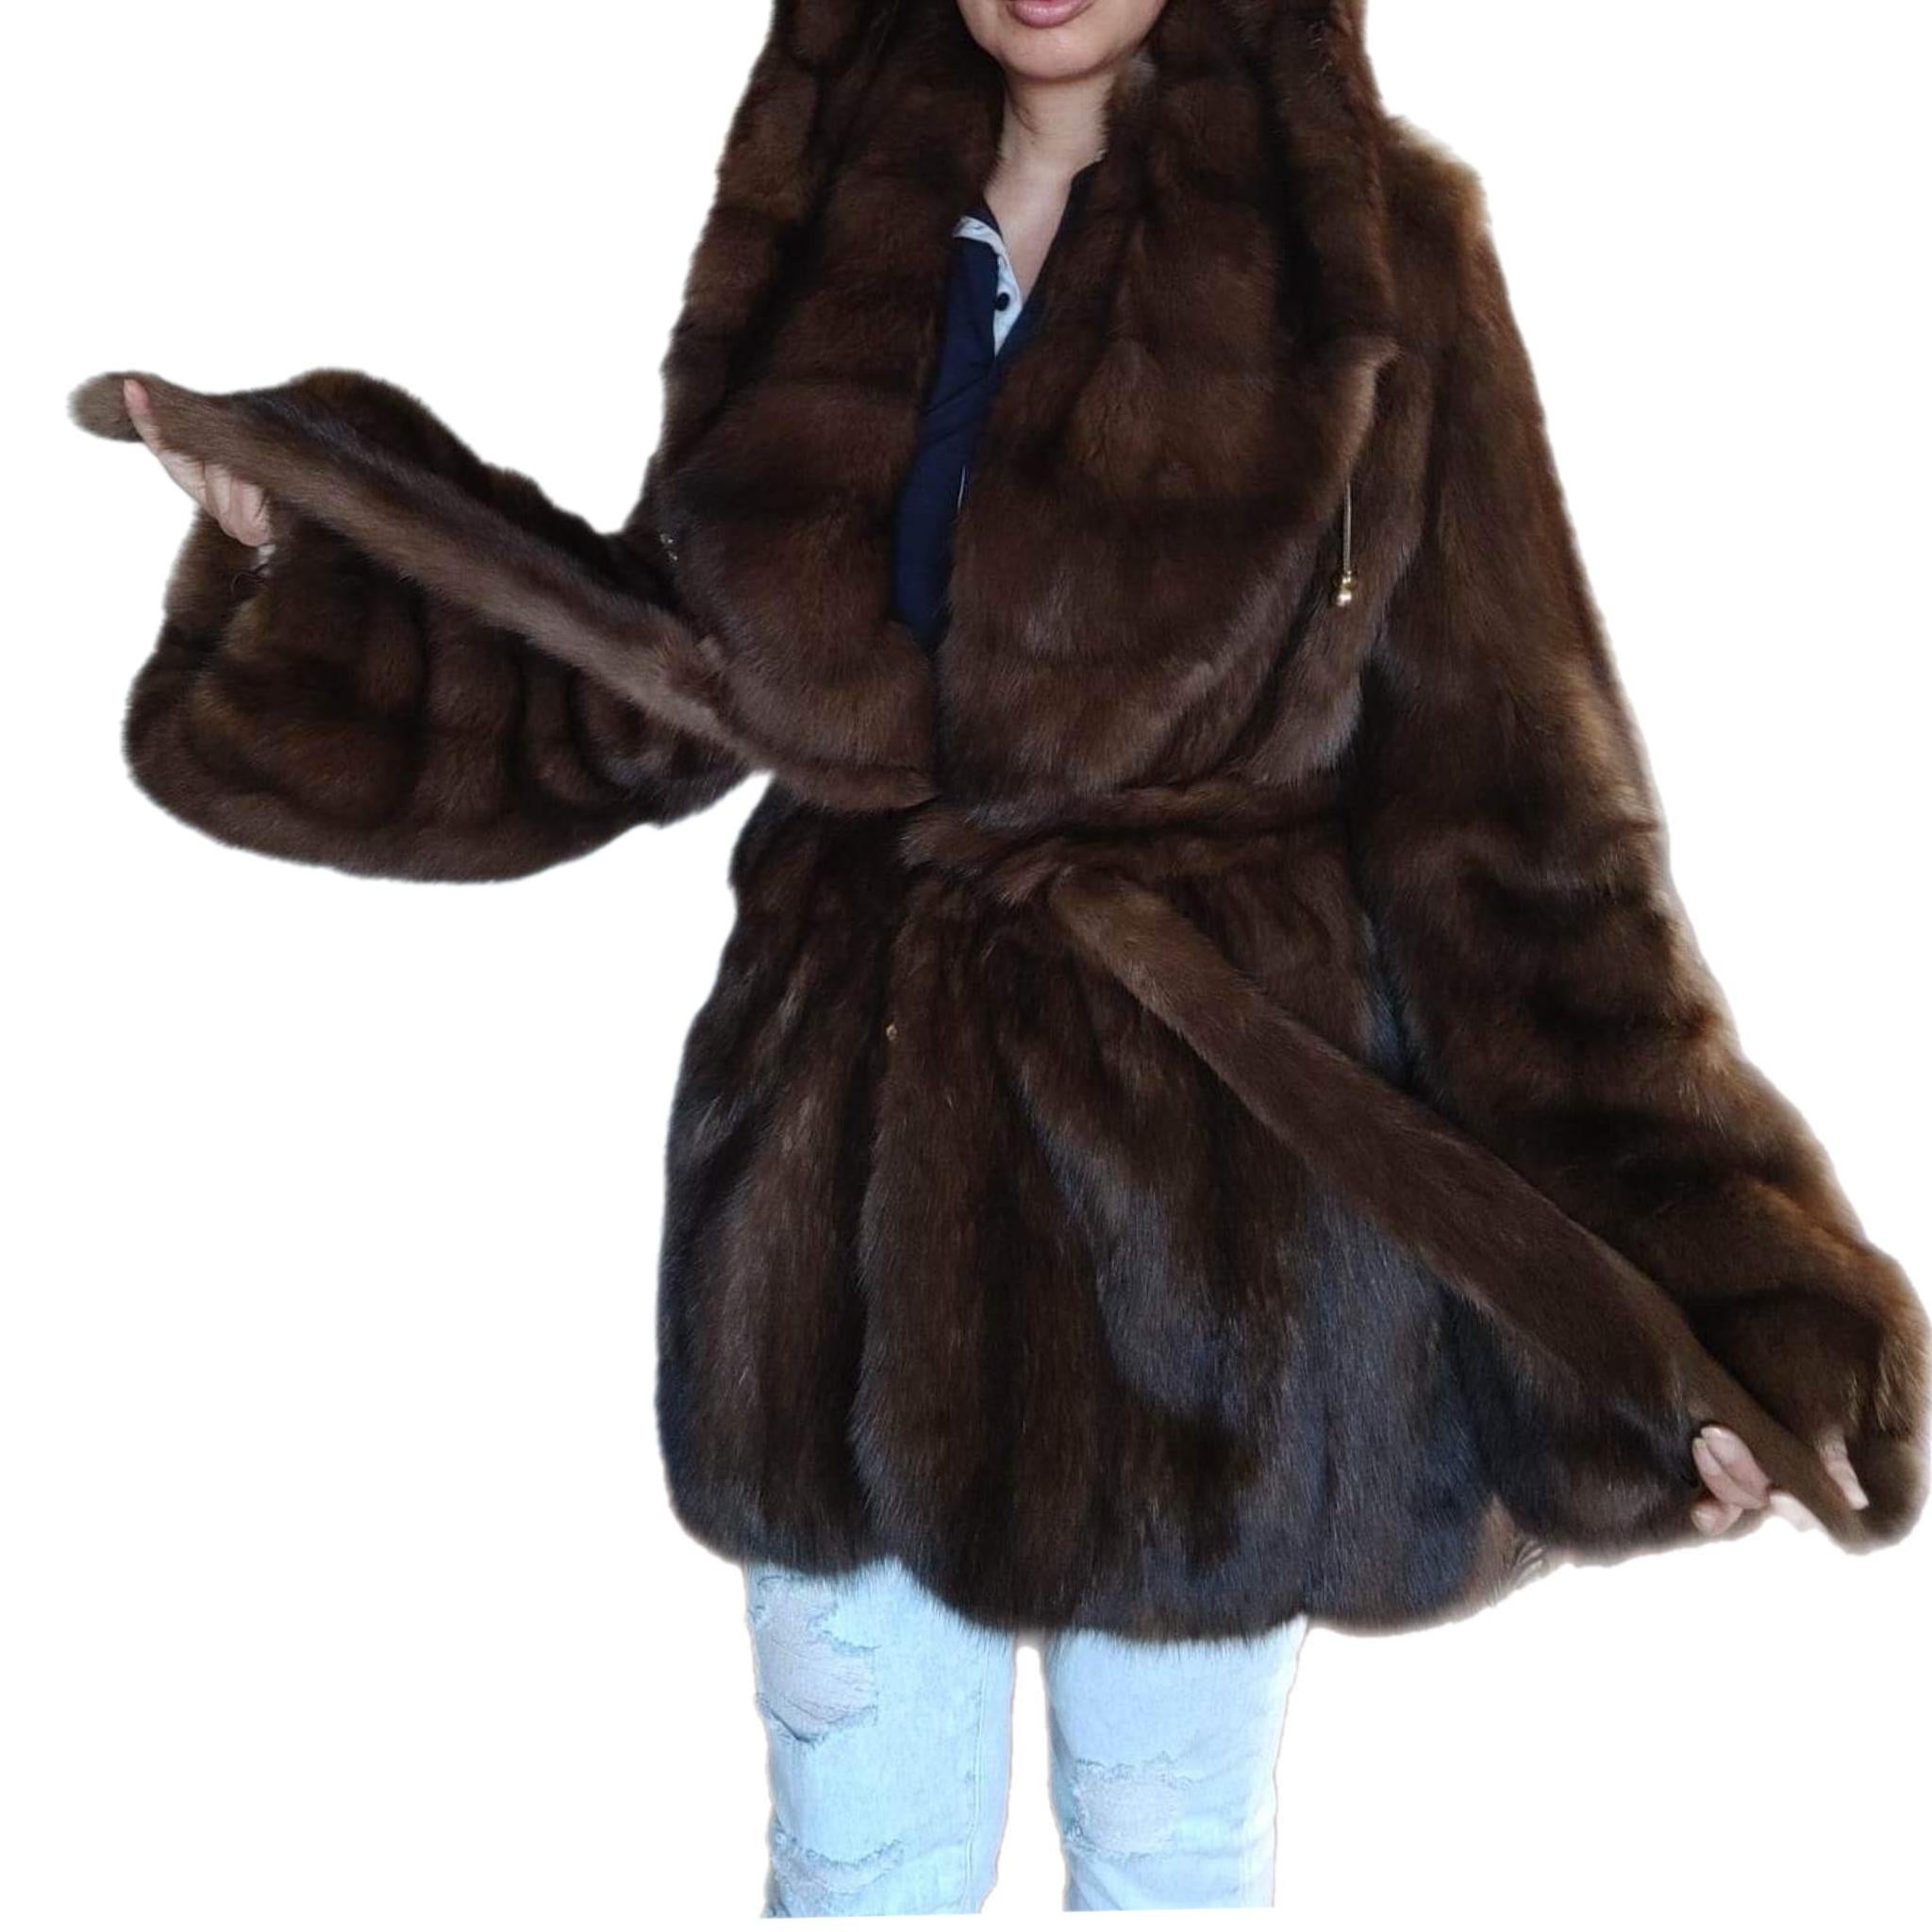 PRODUCT DESCRIPTION: 
Brand new Christian Dior sobol Russian Sable fur coat size 12-14
This beautiful rare find is made of full skins fluffy Russian sable fur, always kept in frozen vault, pristine condition never worn with tags the lining is brand